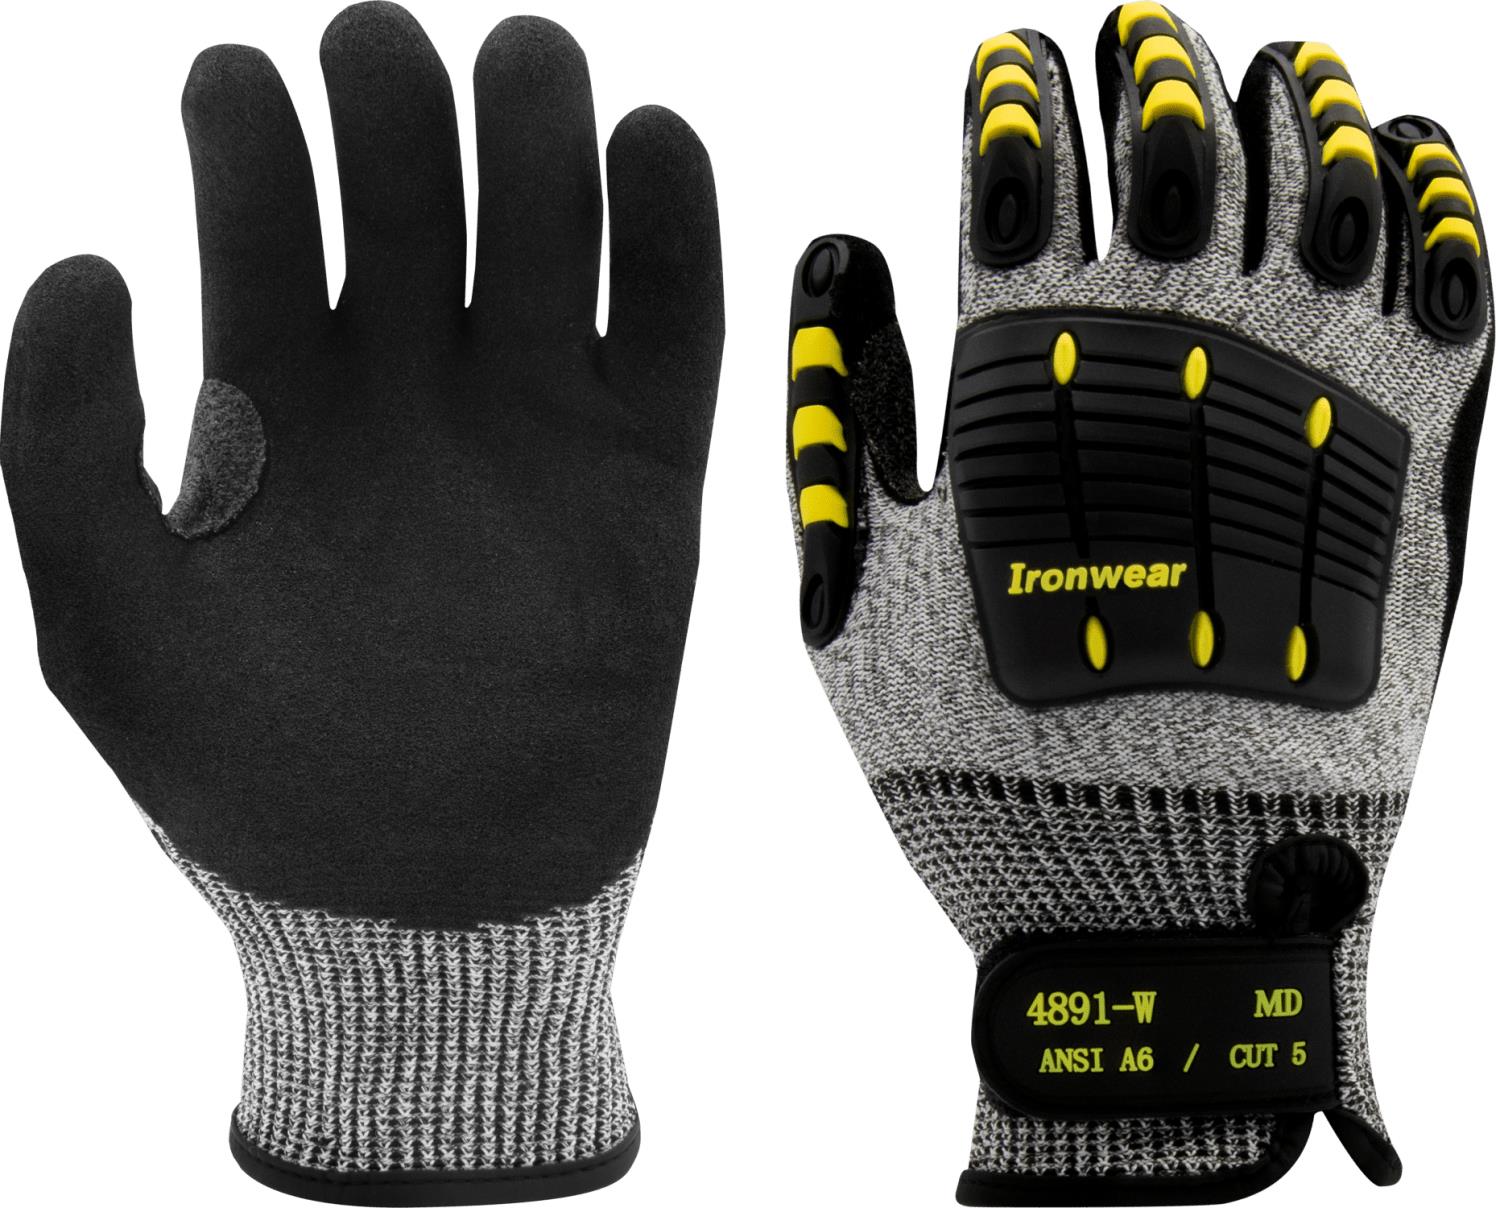 Extra Wide TPR Padded Impact Resistant Glove, Cut Level A6